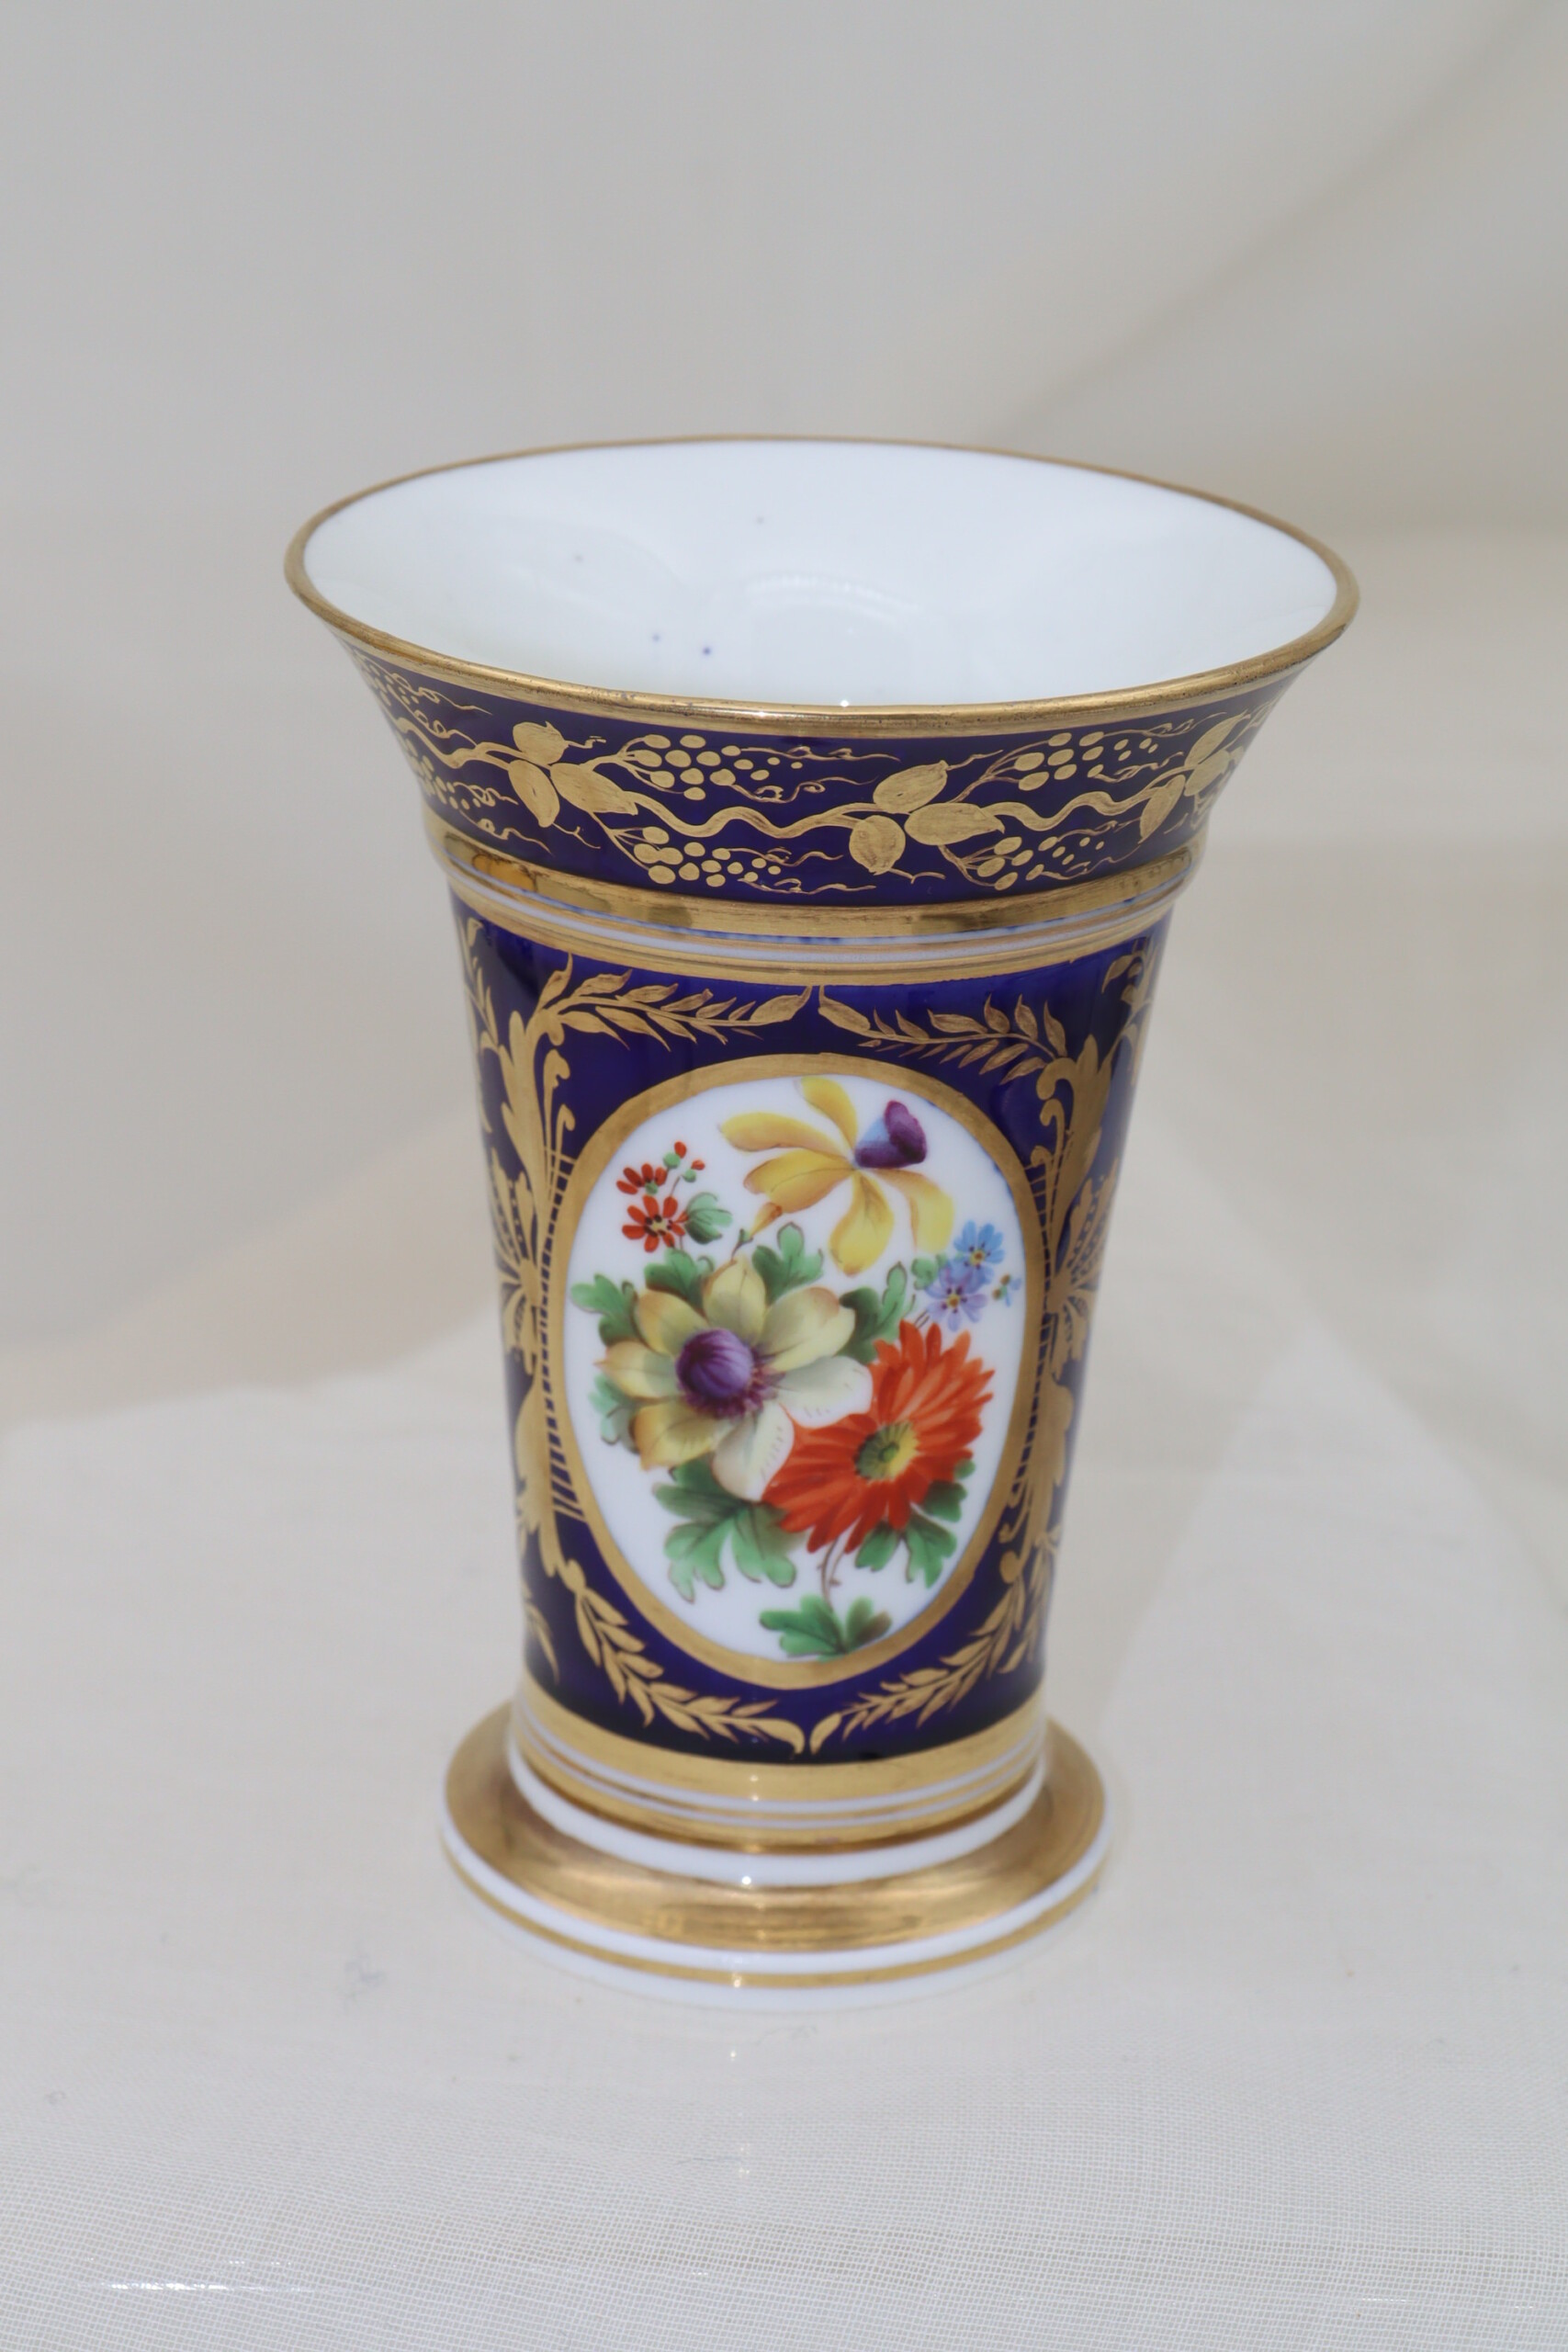 Georgian porcelain hand painted and gilded spill vase – China Rose Antiques